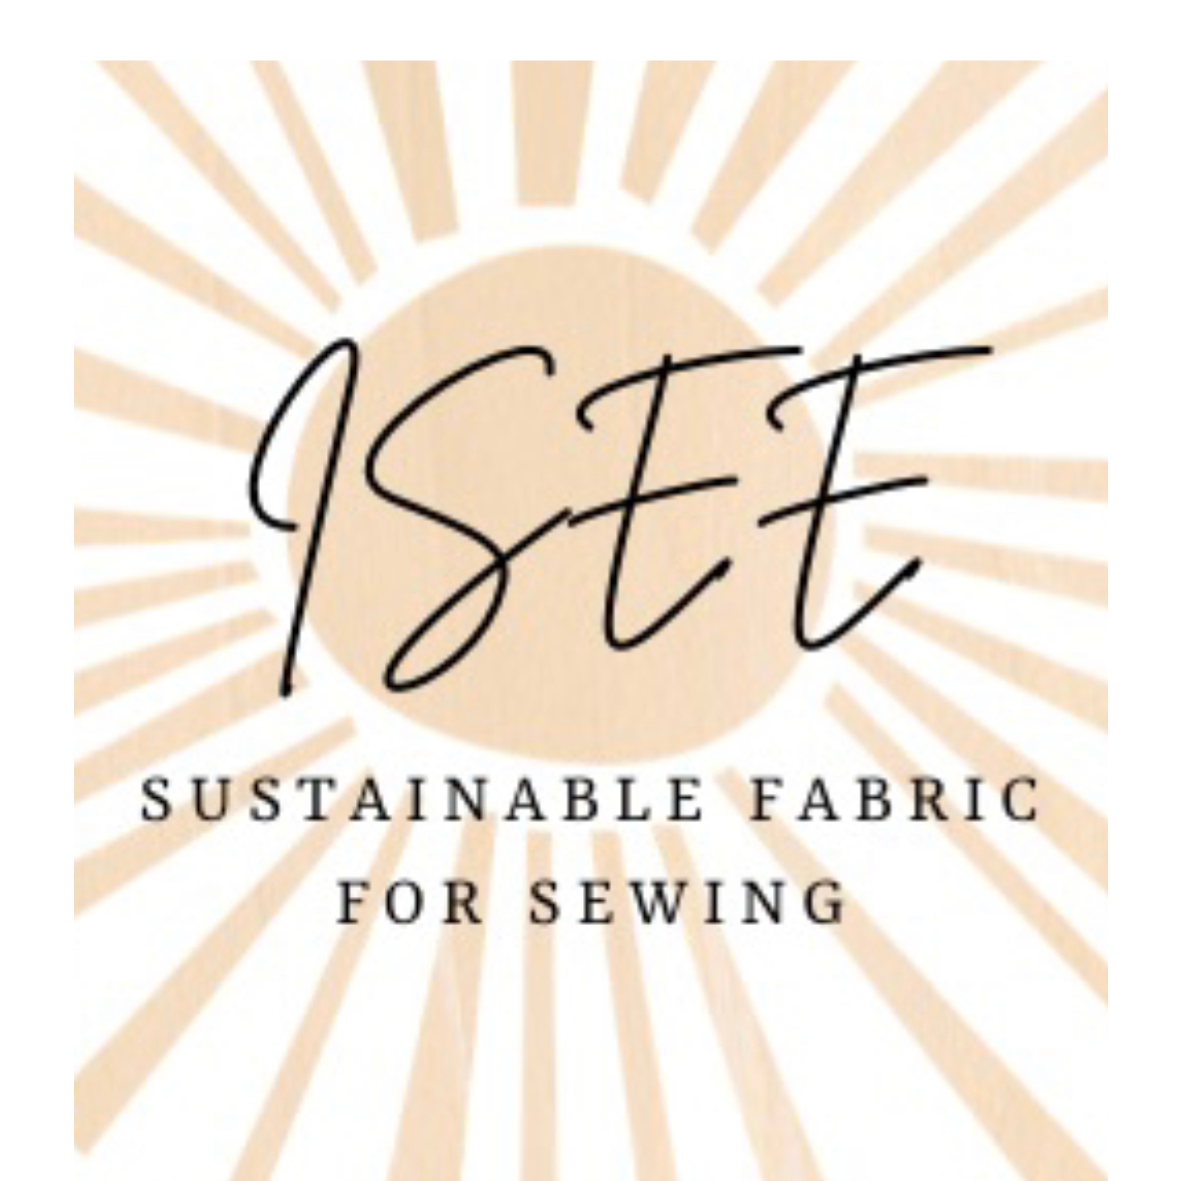 Isee Fabric: Certified Organic, USA milled knit and woven fabrics